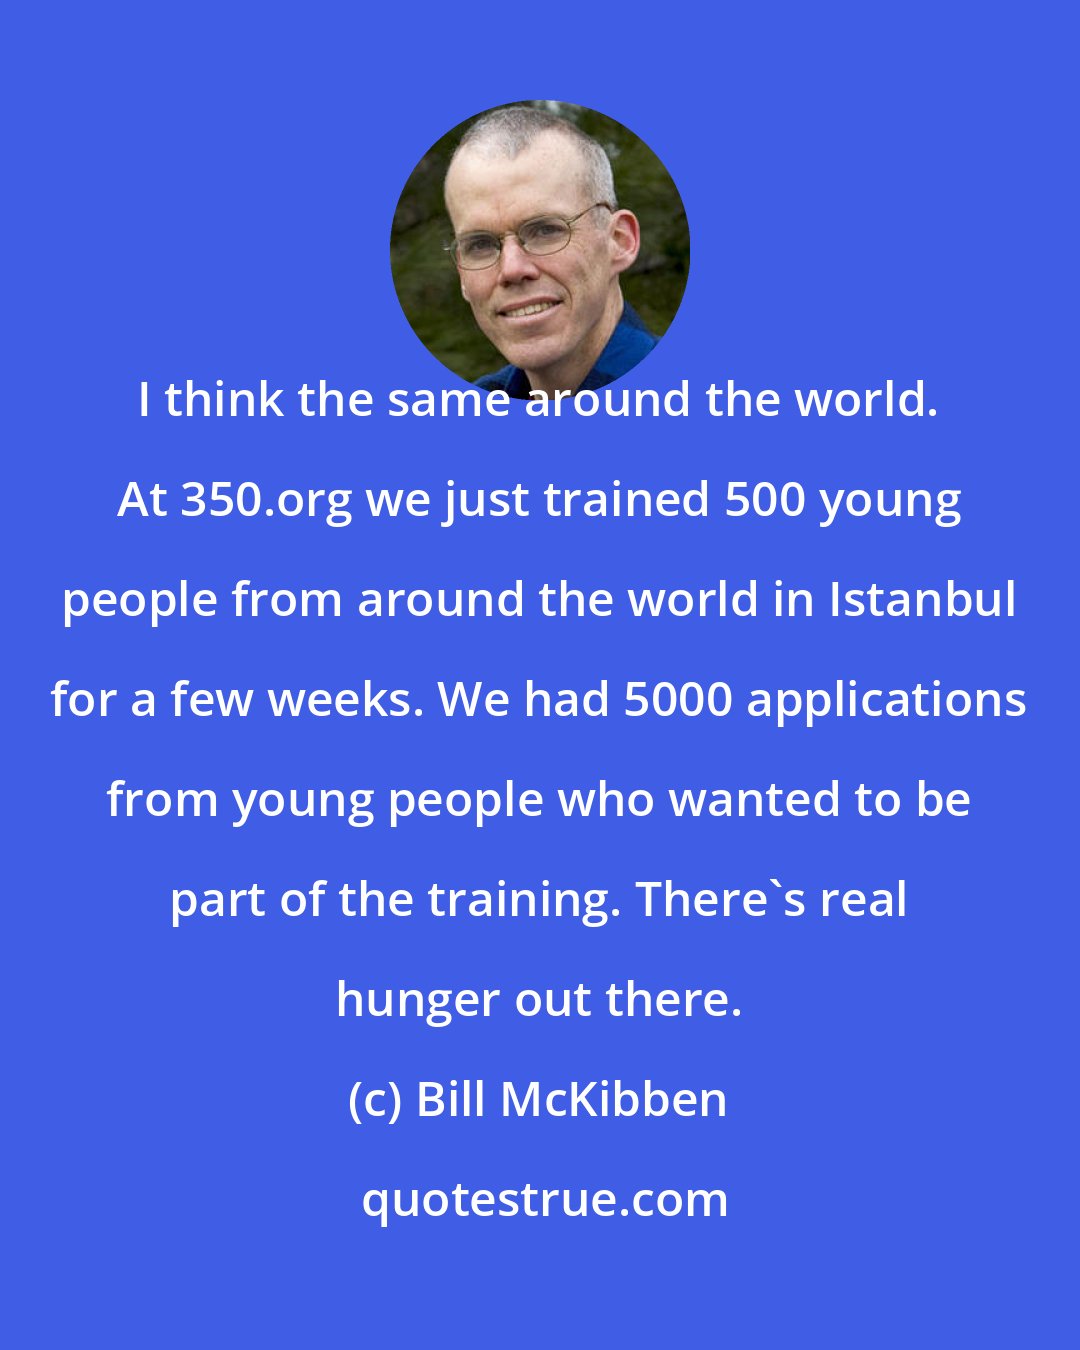 Bill McKibben: I think the same around the world. At 350.org we just trained 500 young people from around the world in Istanbul for a few weeks. We had 5000 applications from young people who wanted to be part of the training. There's real hunger out there.